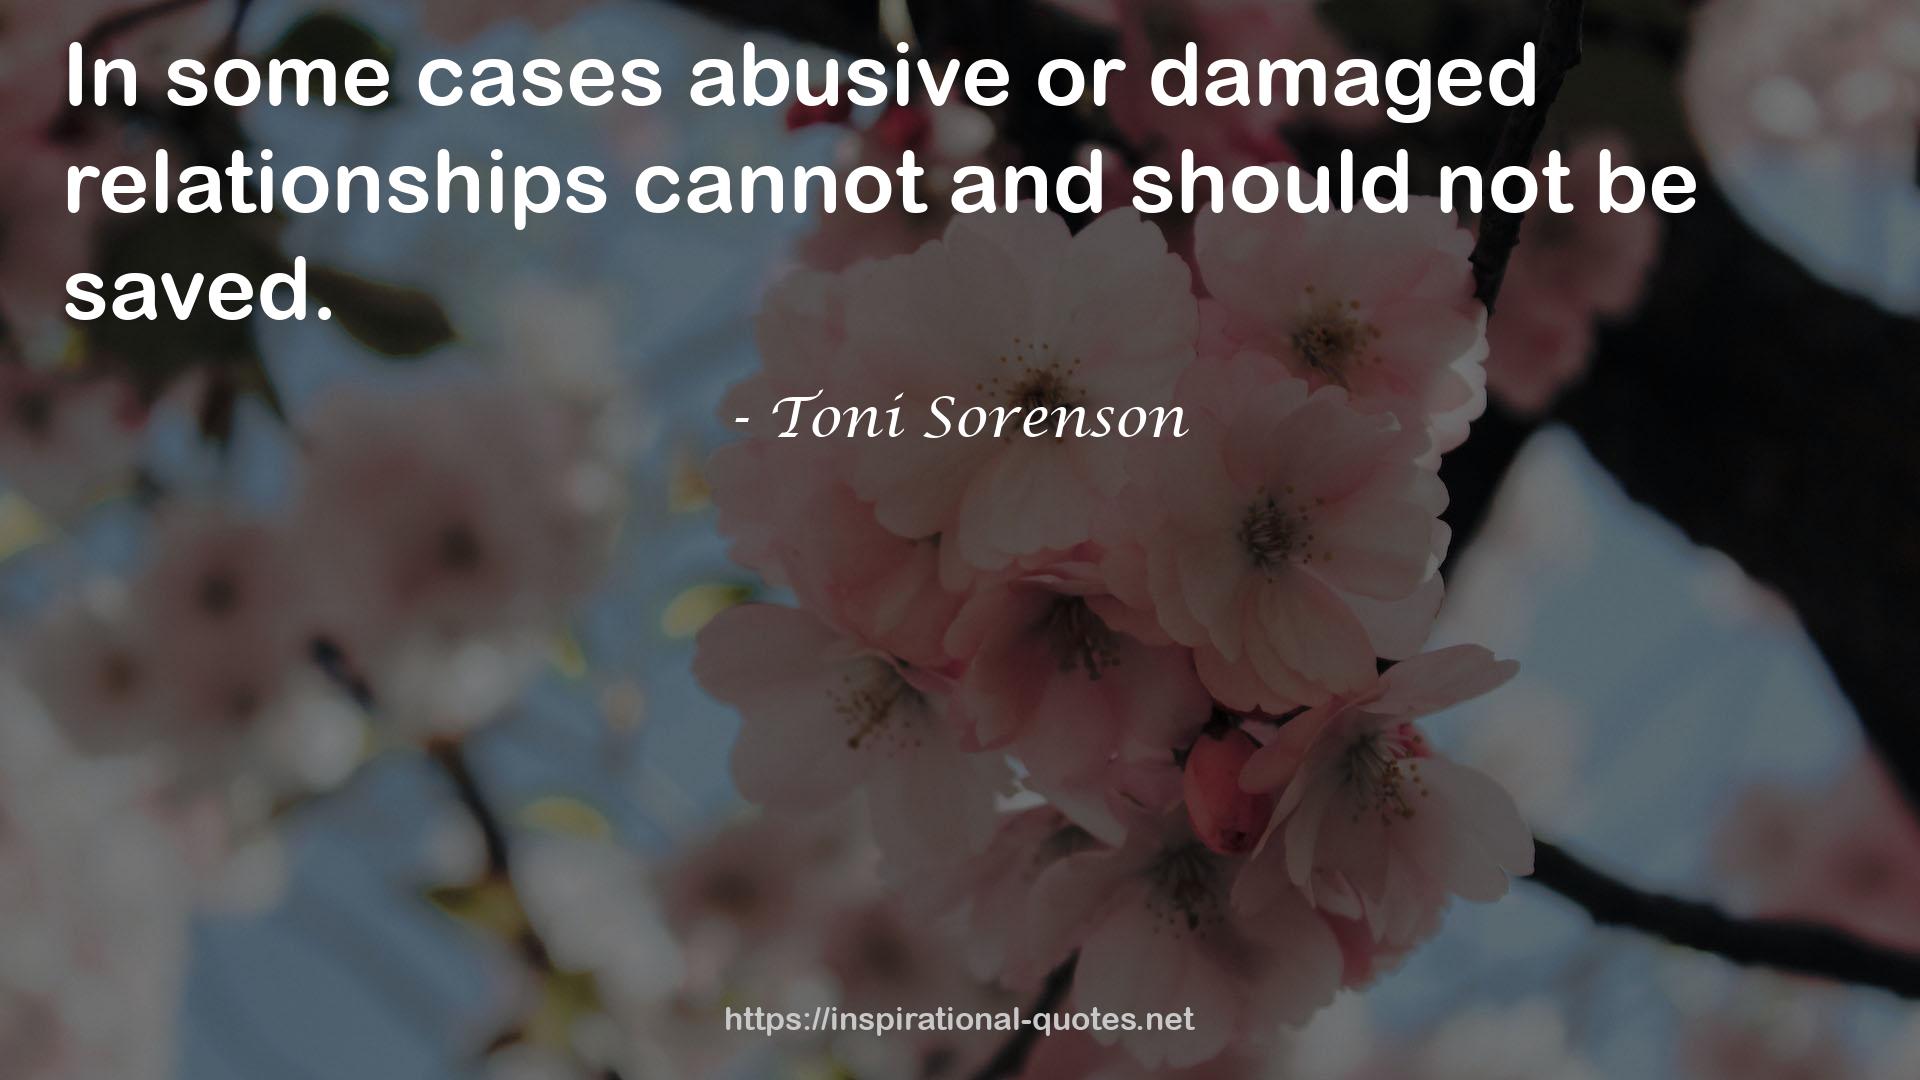 abusive or damaged relationships  QUOTES